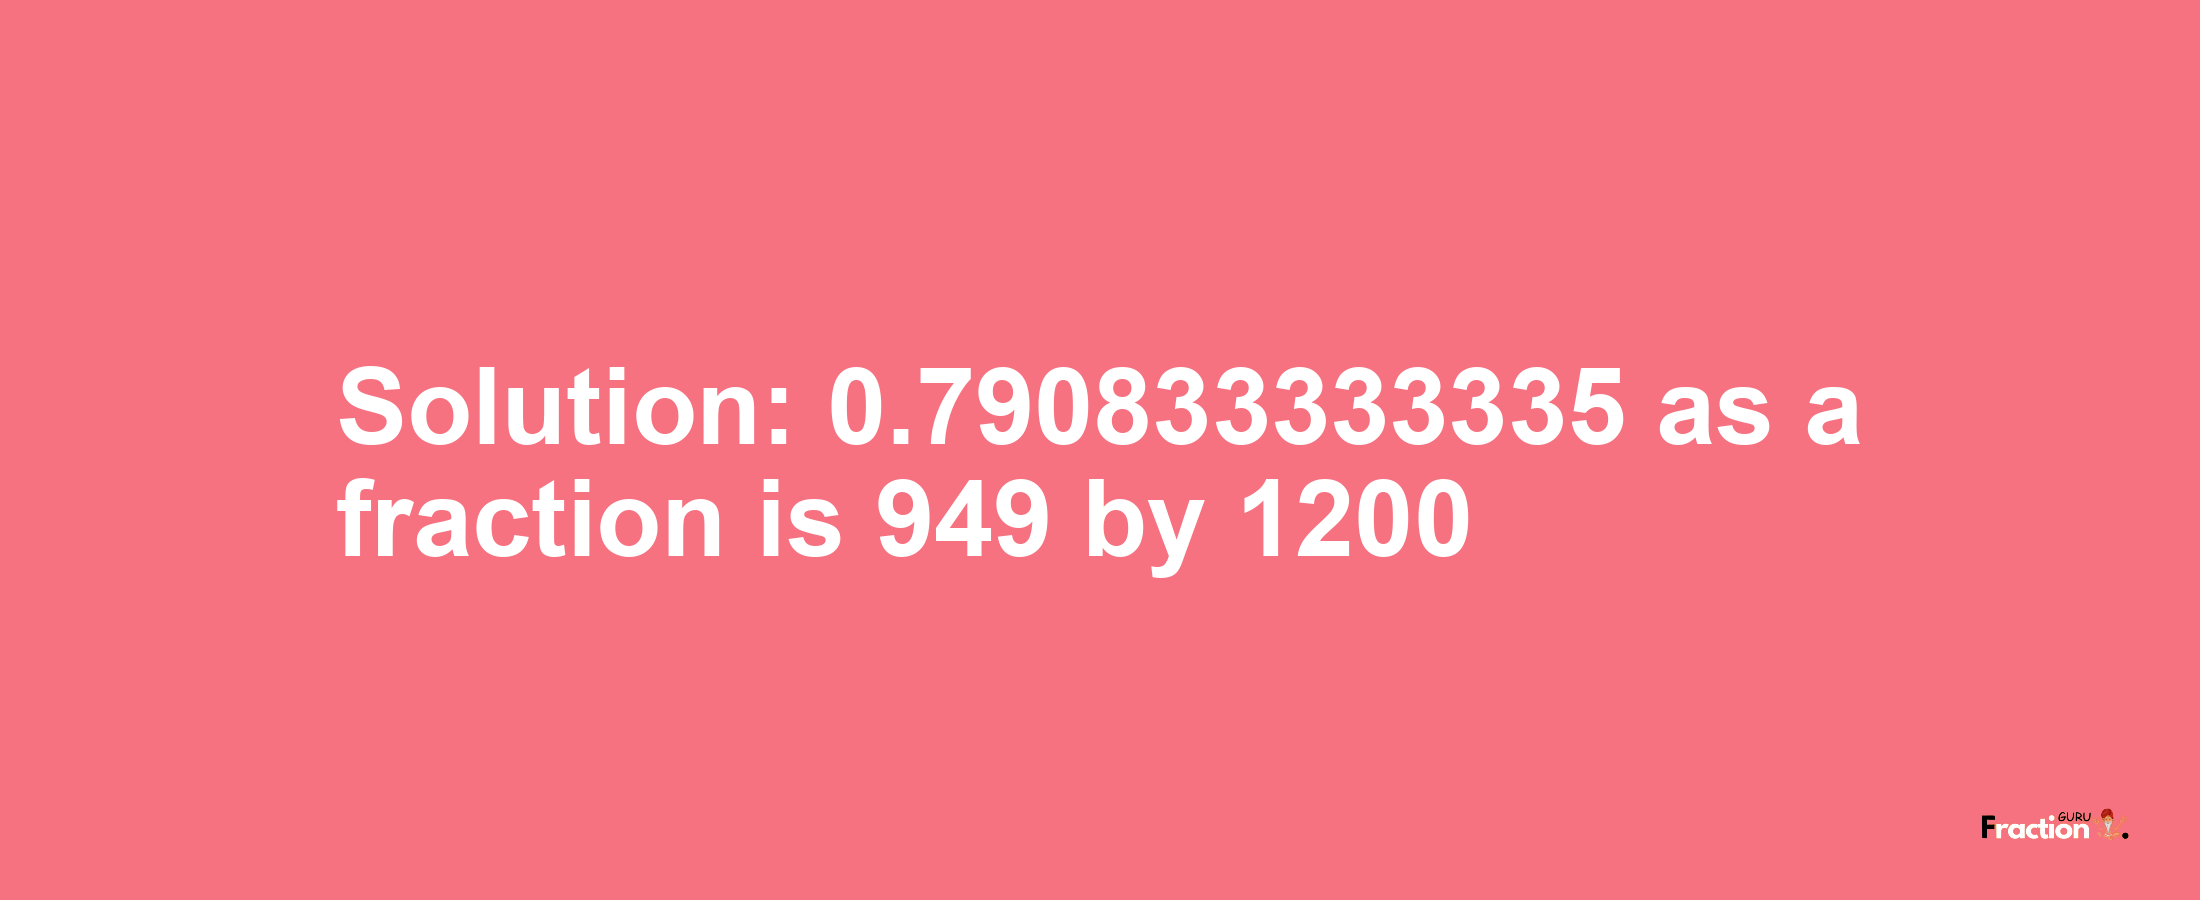 Solution:0.790833333335 as a fraction is 949/1200